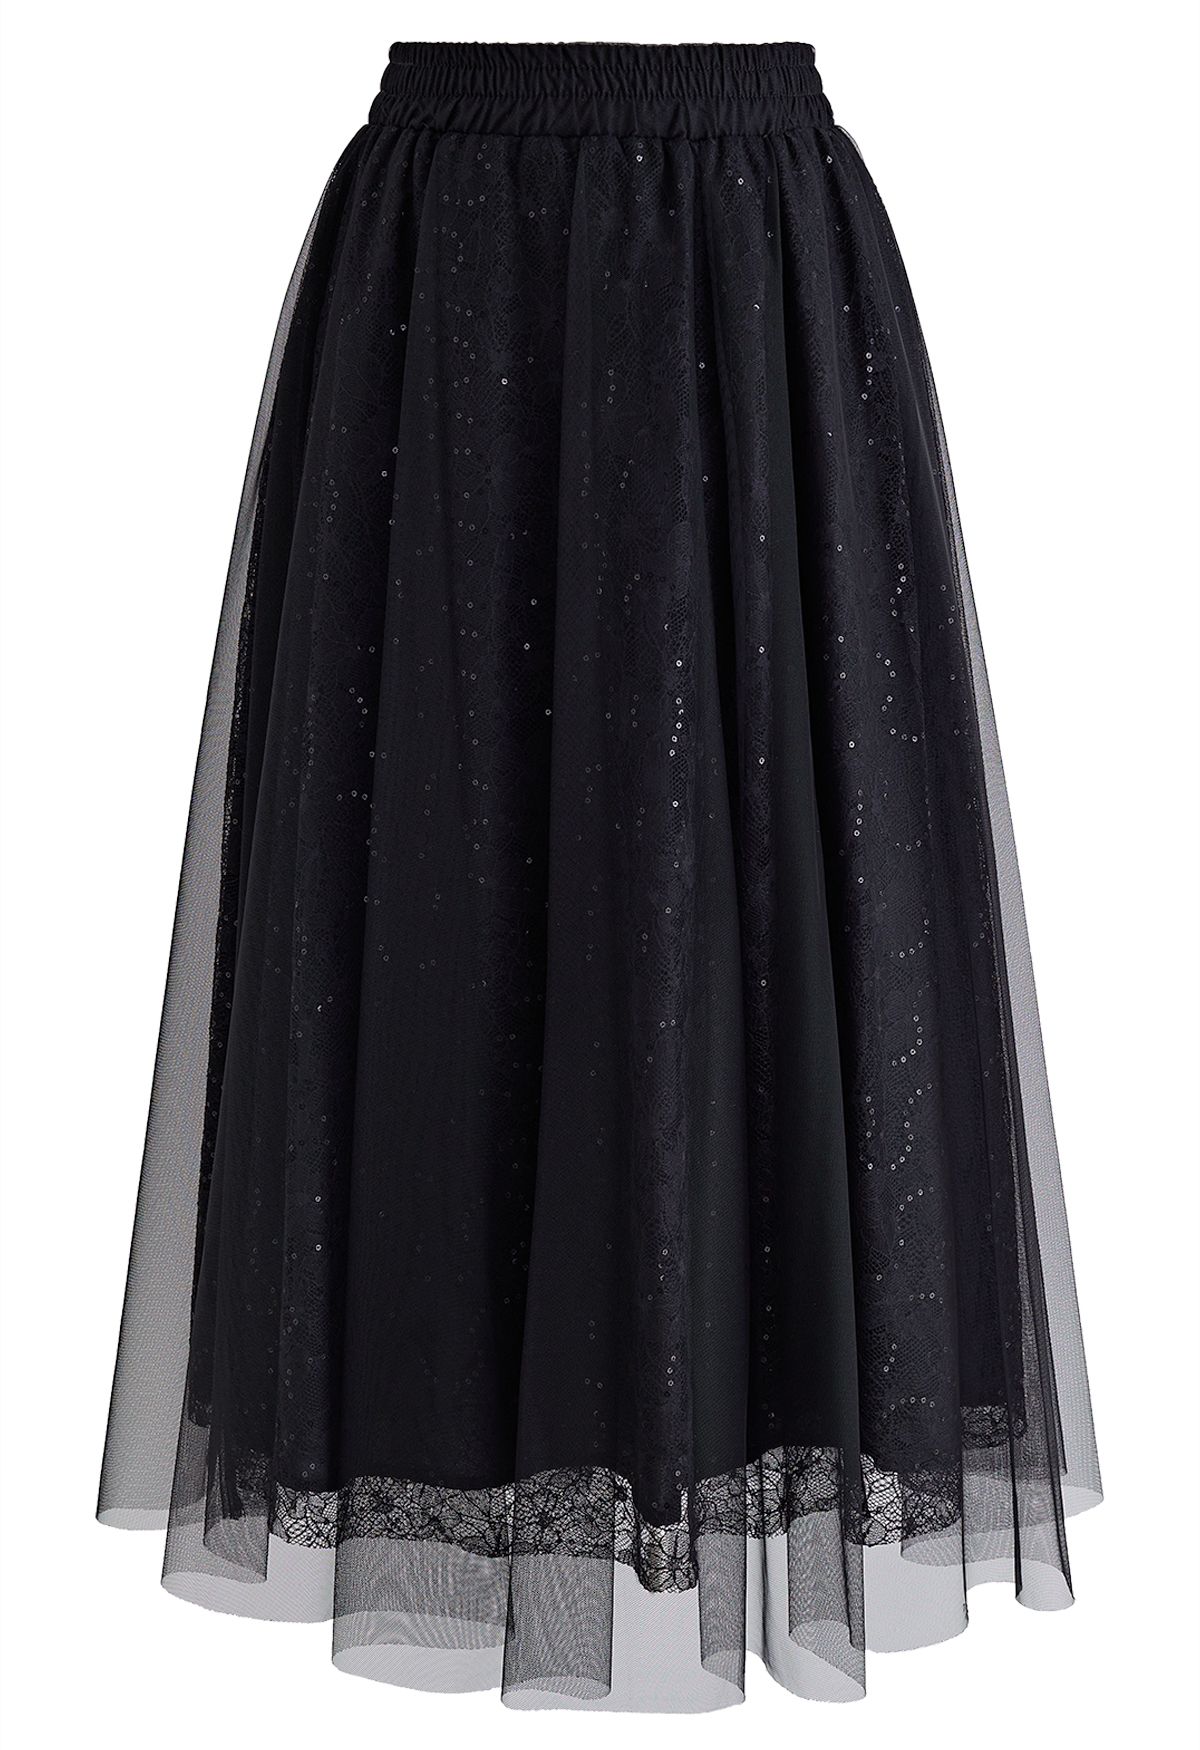 Sequined Floral Lace Mesh Tulle Skirt in Black